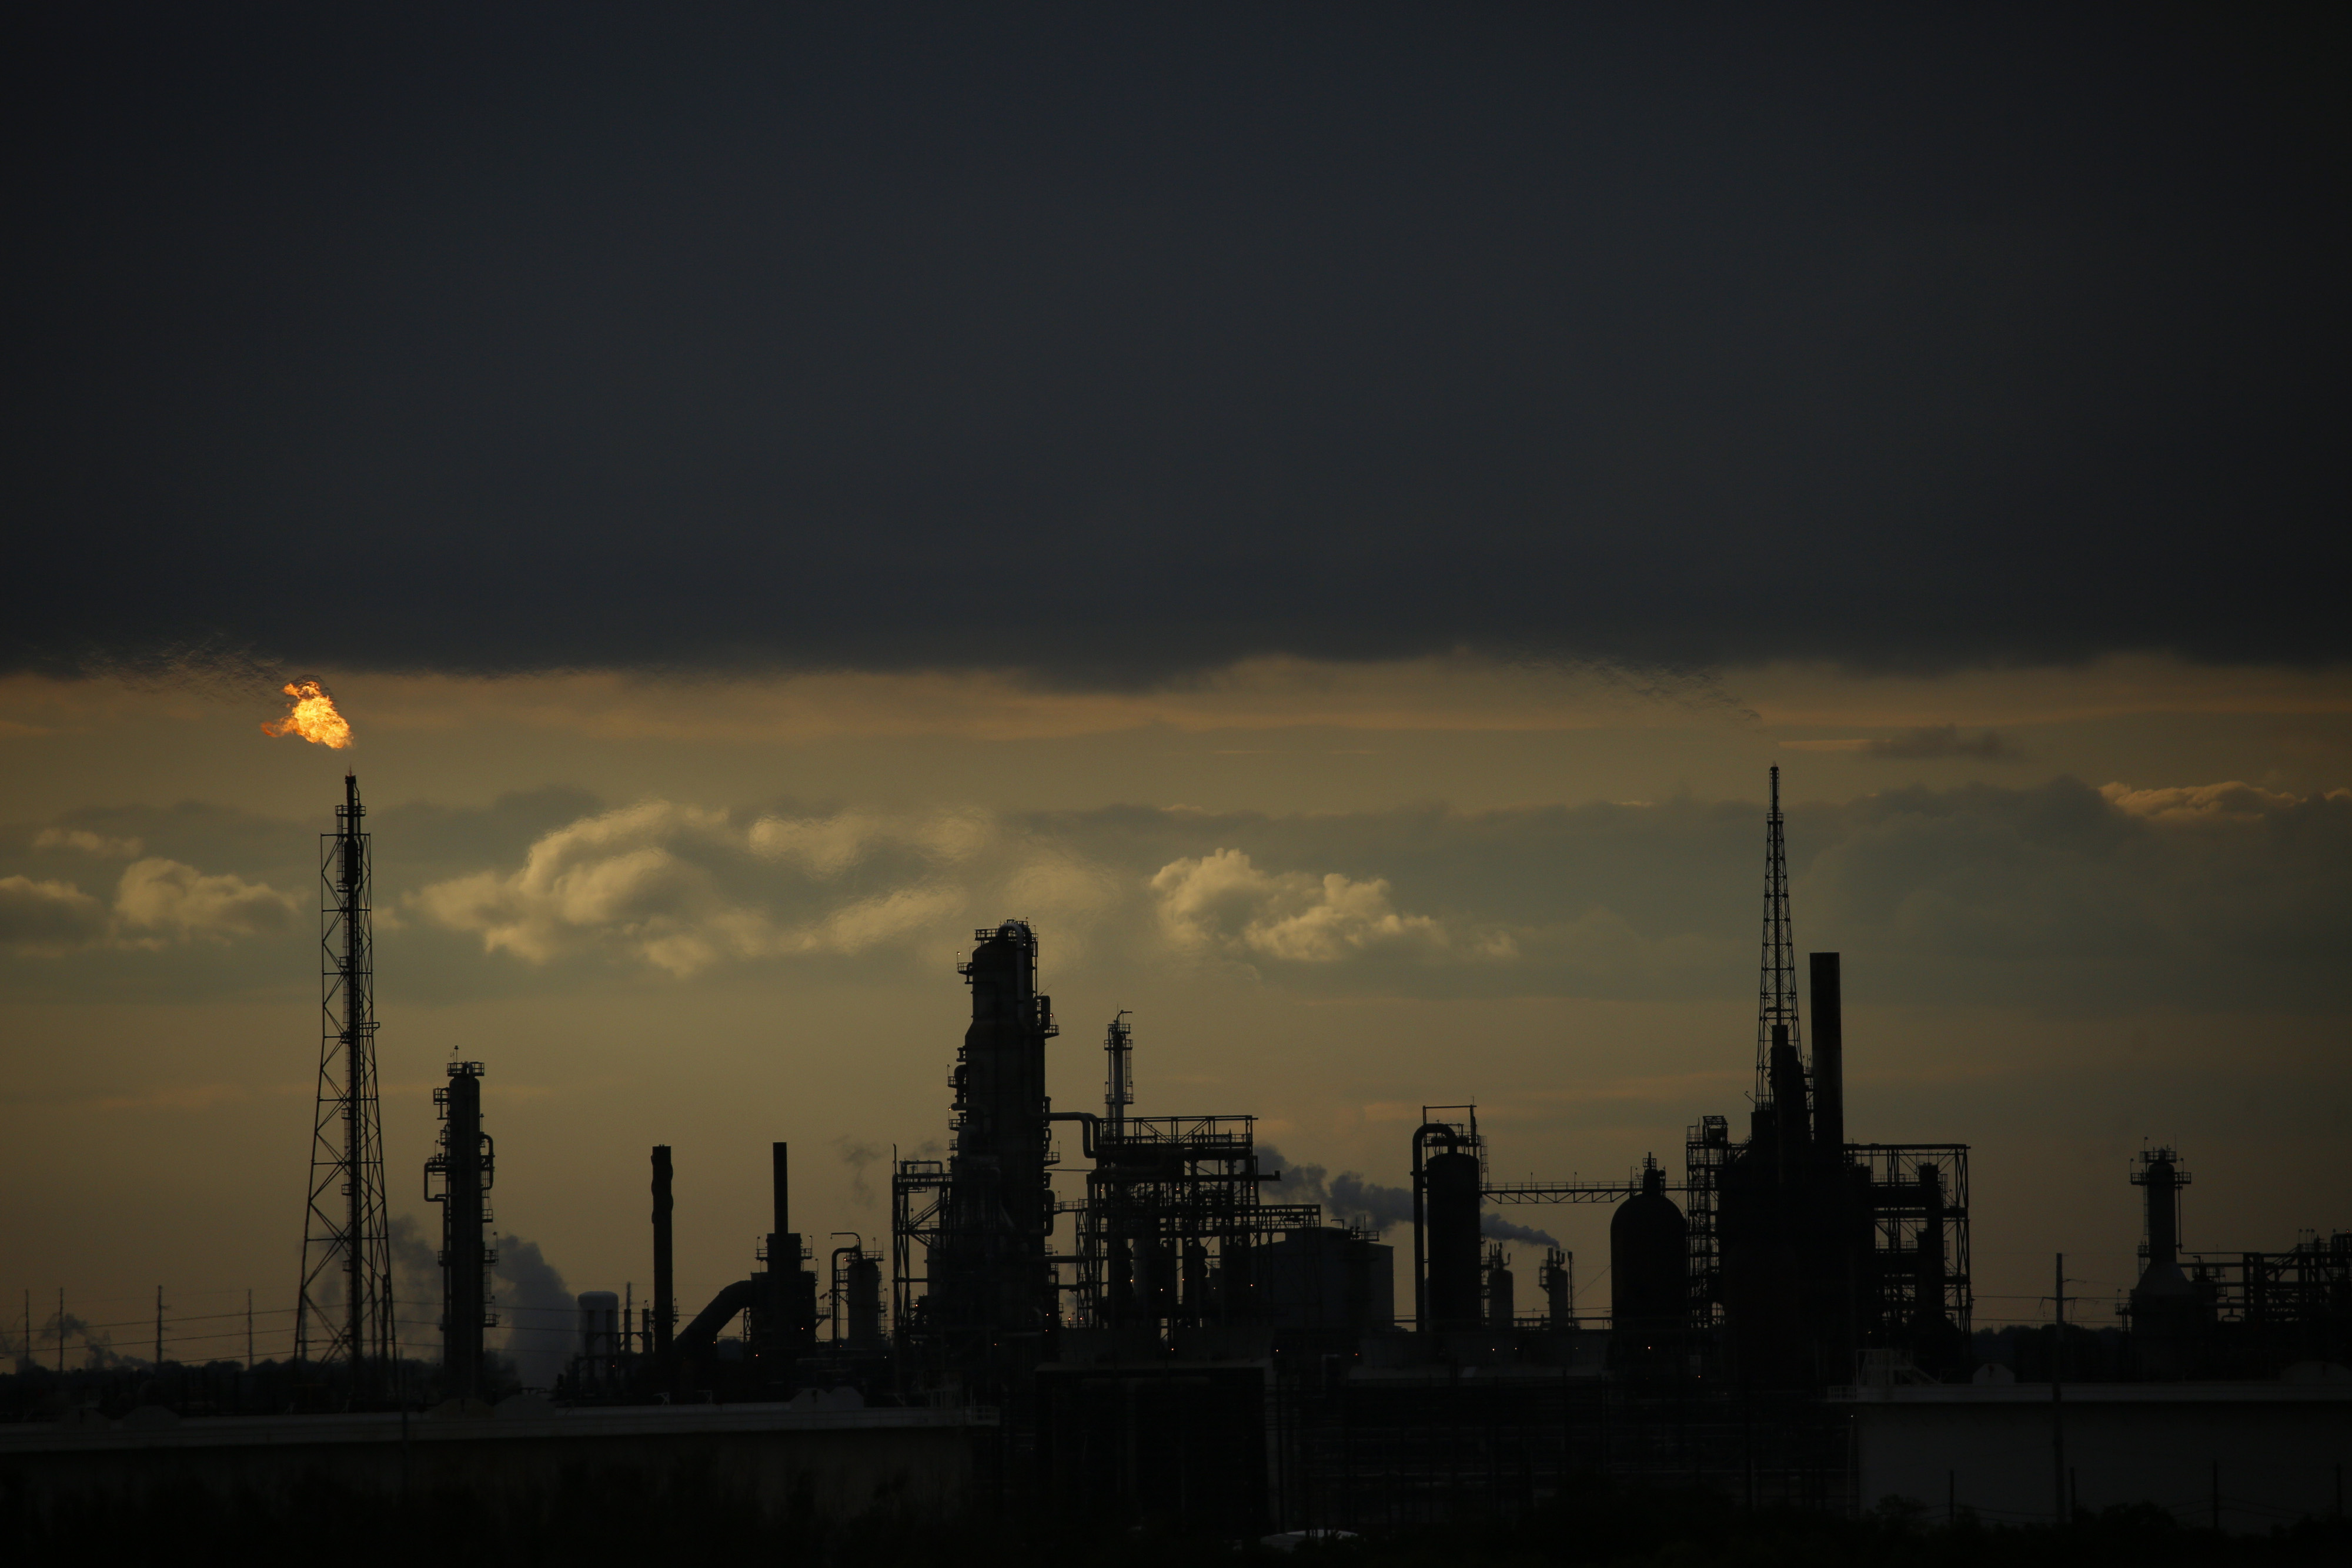 Flames from a flare stack at an oil refinery at dusk in Texas